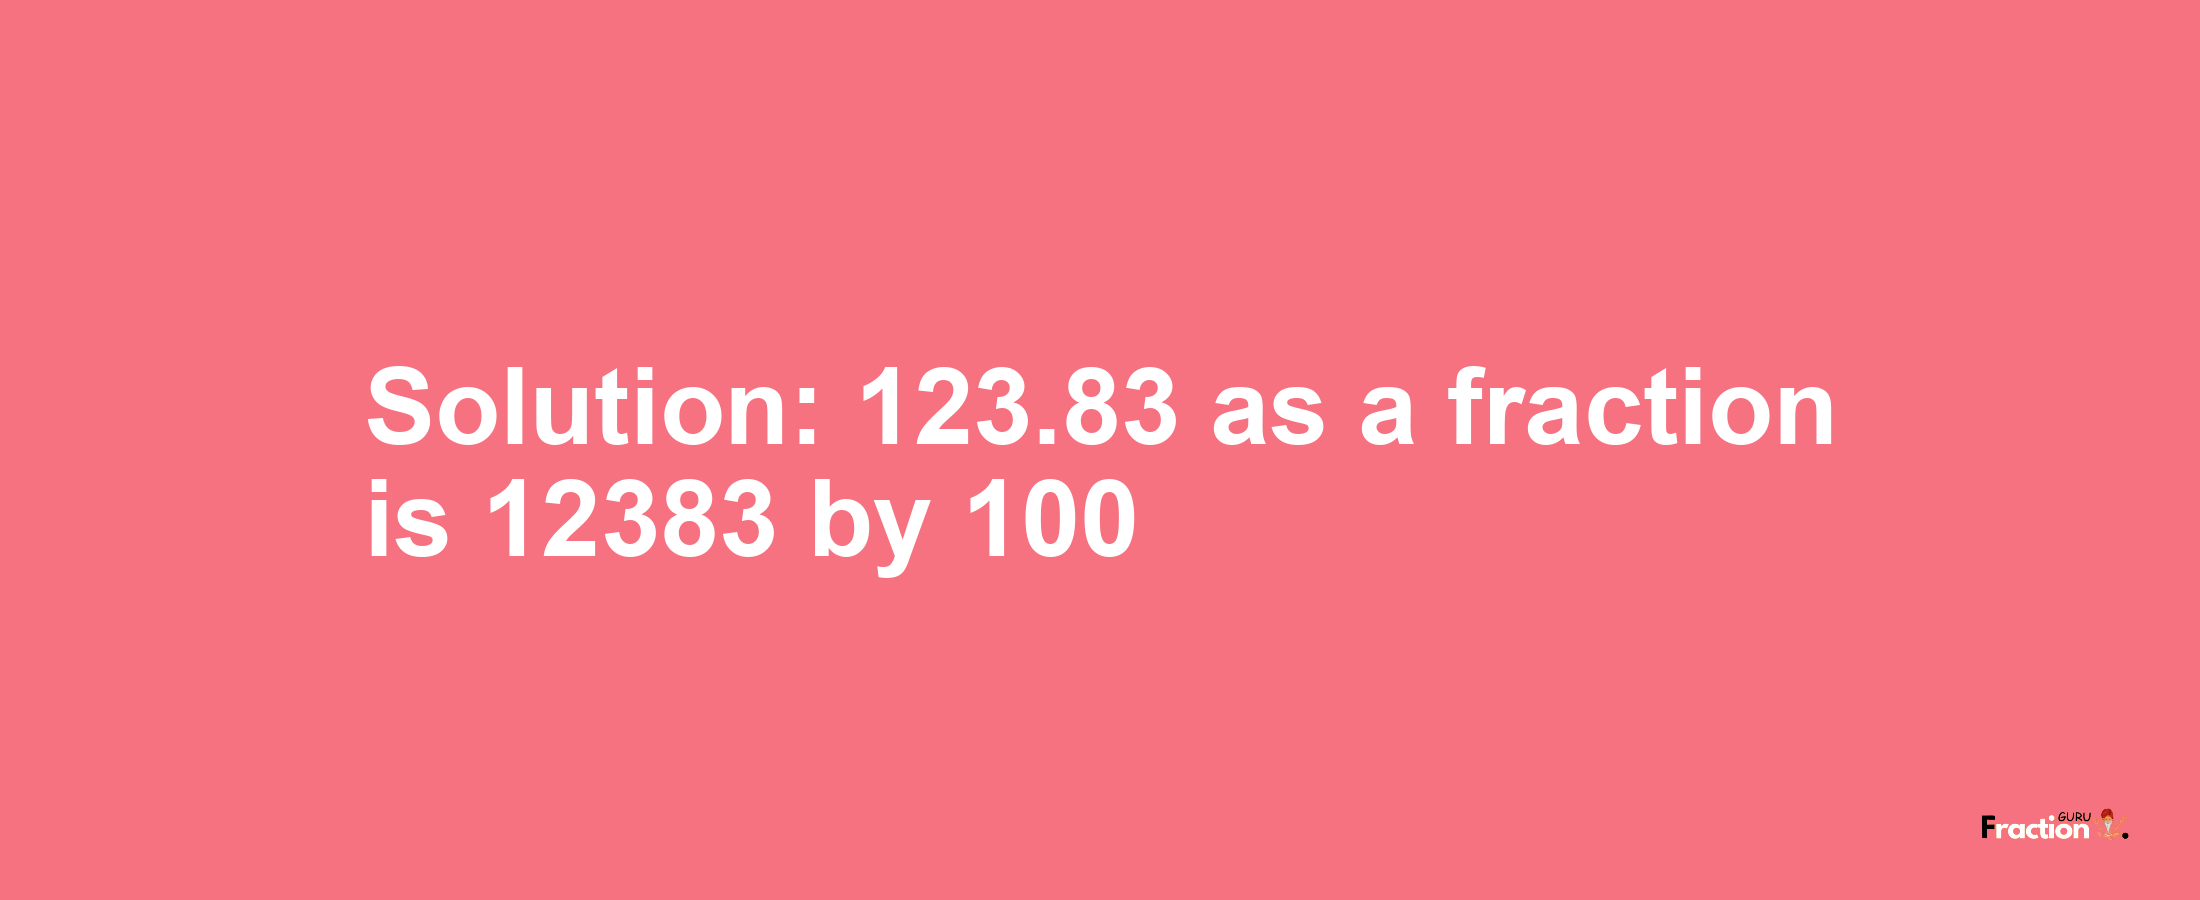 Solution:123.83 as a fraction is 12383/100